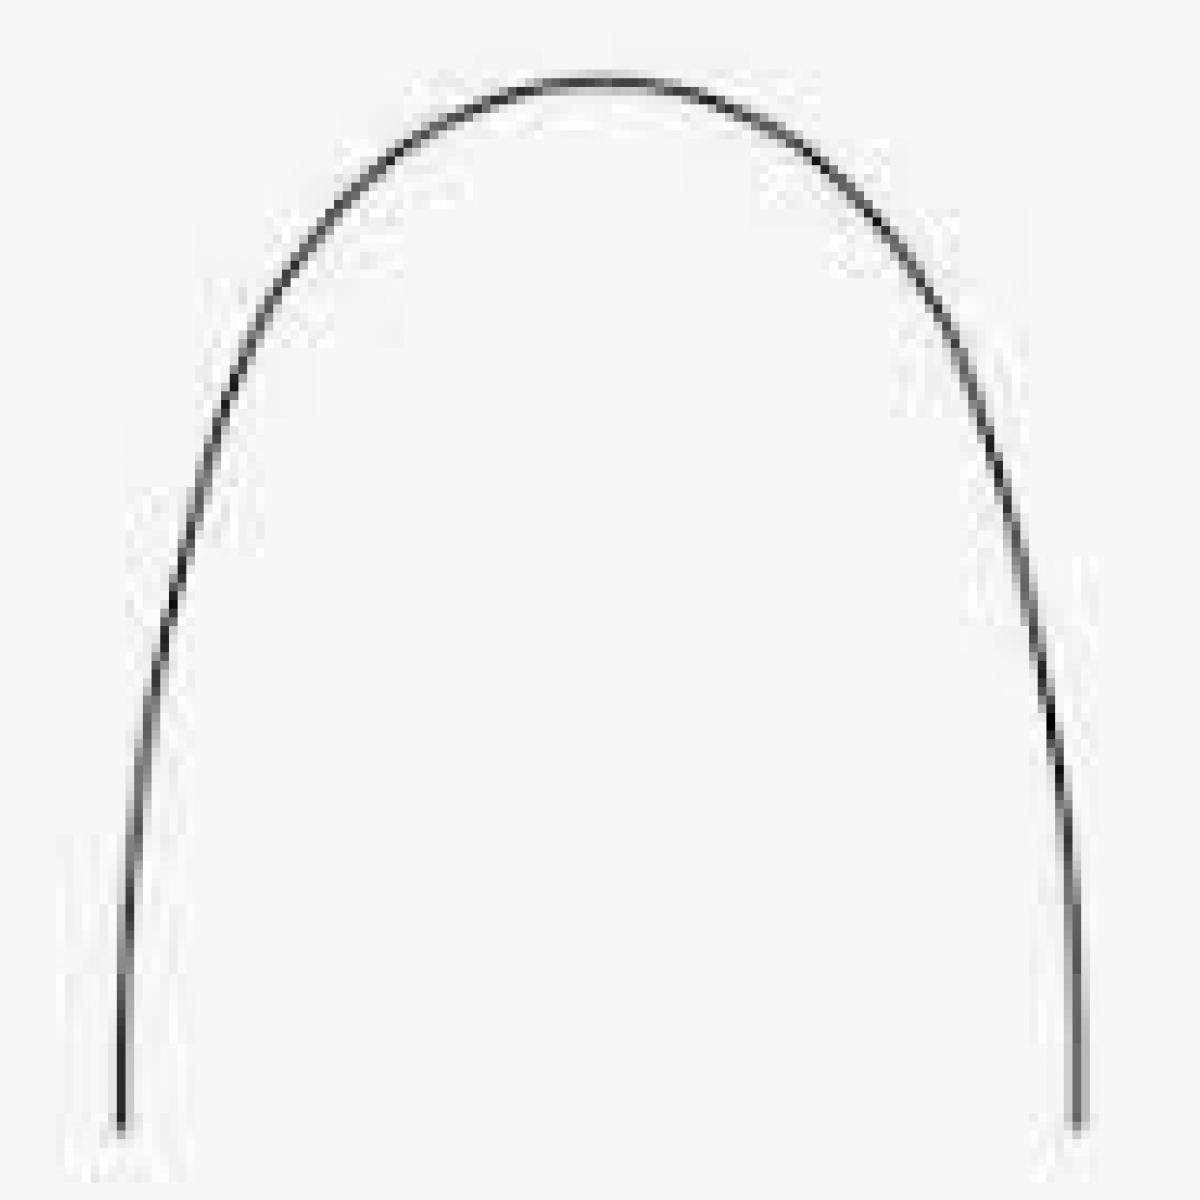 ARCOS NITI SUPERELASTICO OVOIDE RECTANG SUP 016X016 CX10 KDM -